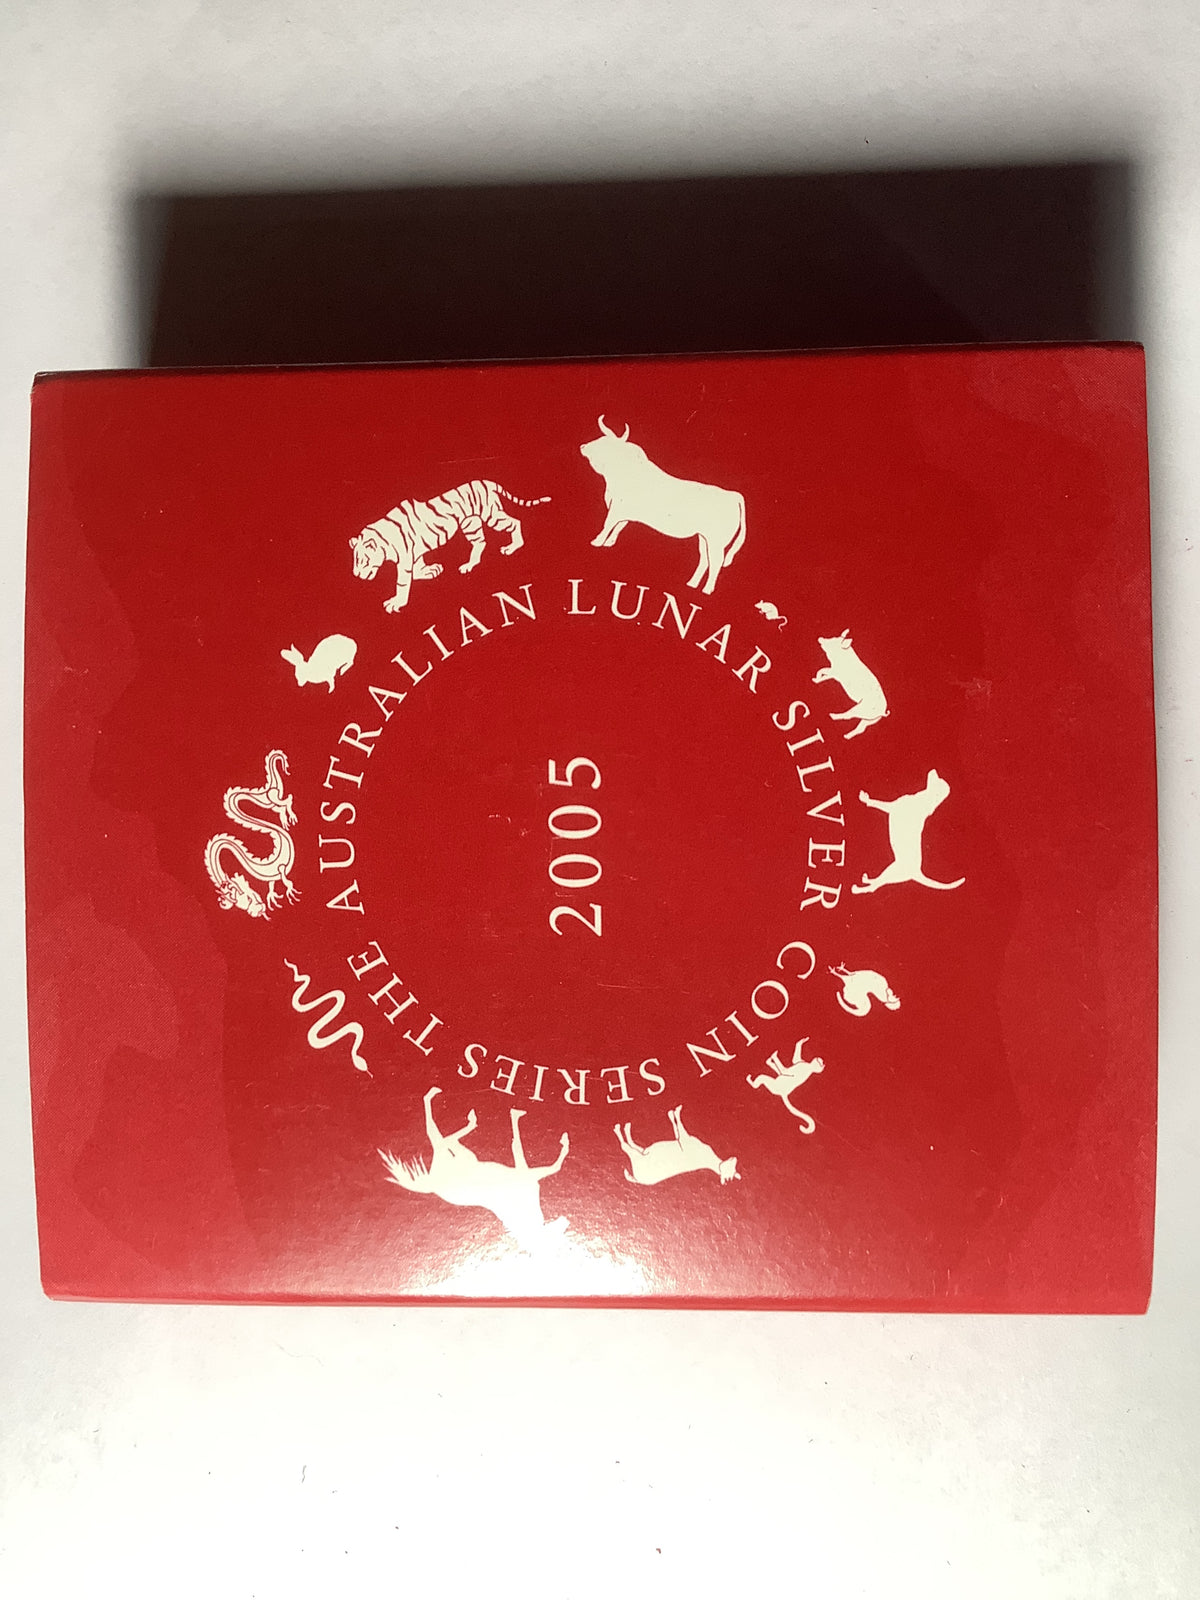 2005 $2 Australian Proof Lunar Silver Coin Series. Year of the Rooster 2-ounce Silver Coin.